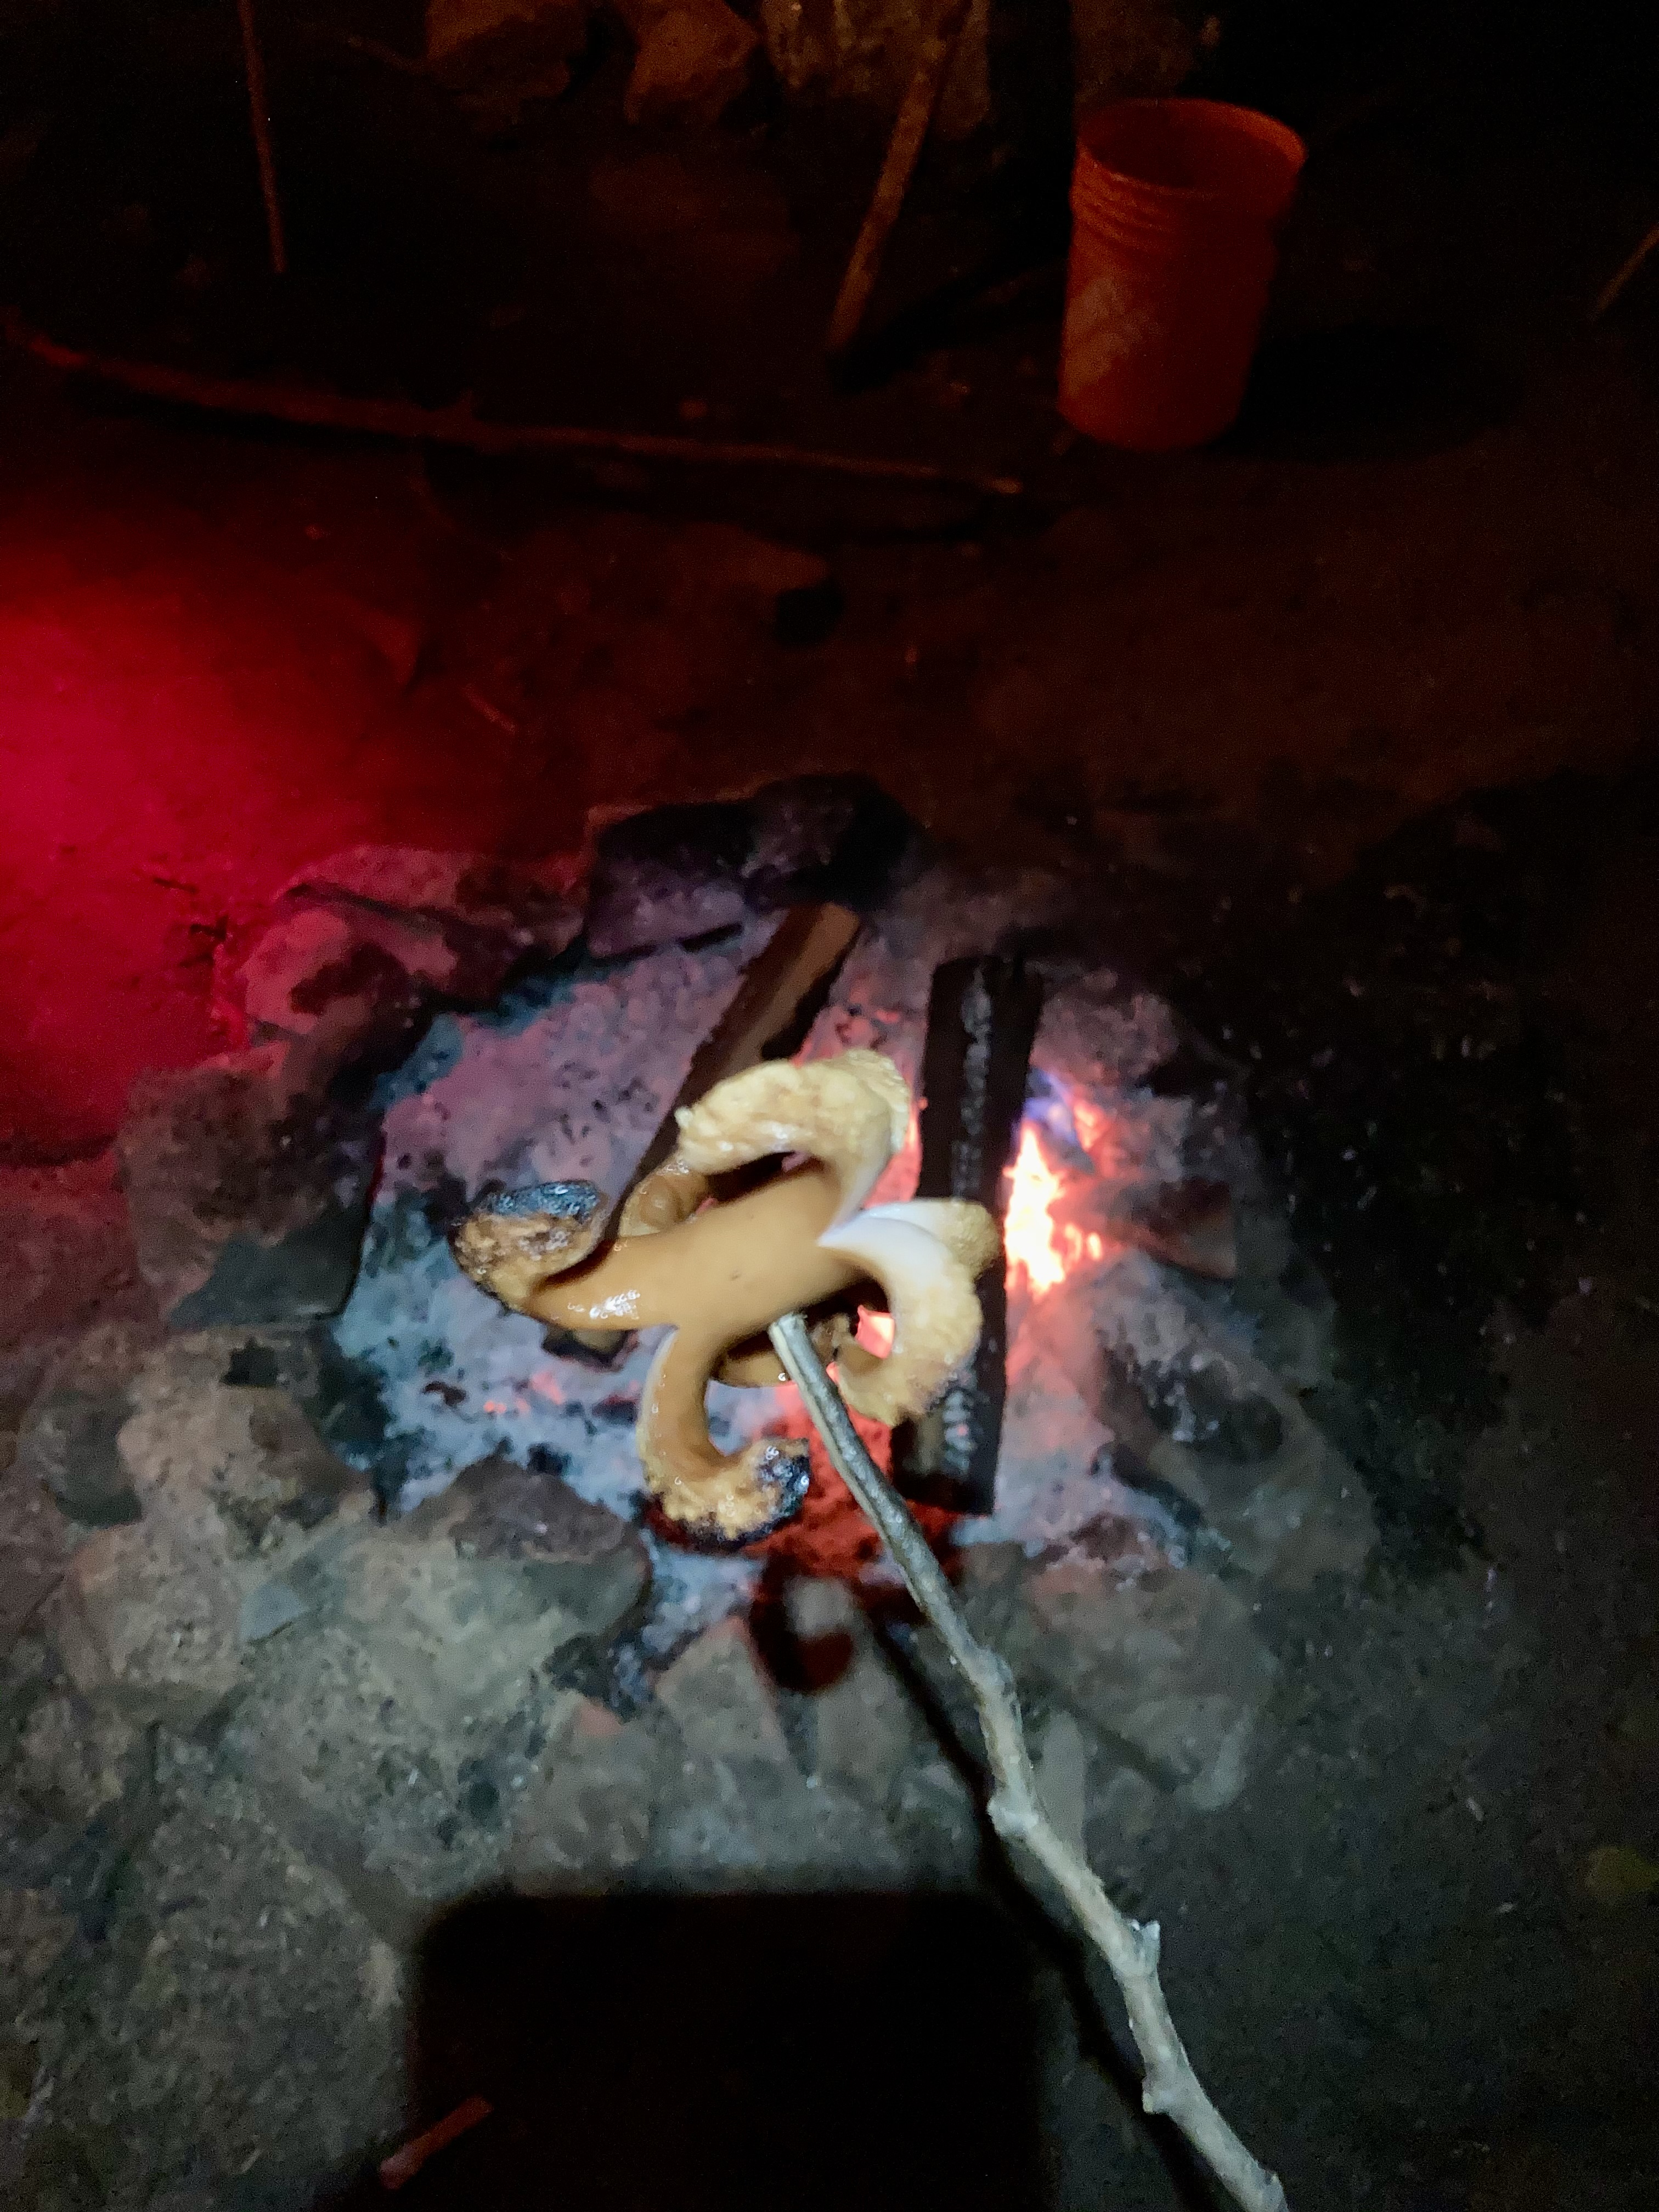 A basic hotdog on a stick over the fire, but with either end cut into quadrants. The heat makes those “legs” curl up to look… well, not really like a spider, but there are eight things.